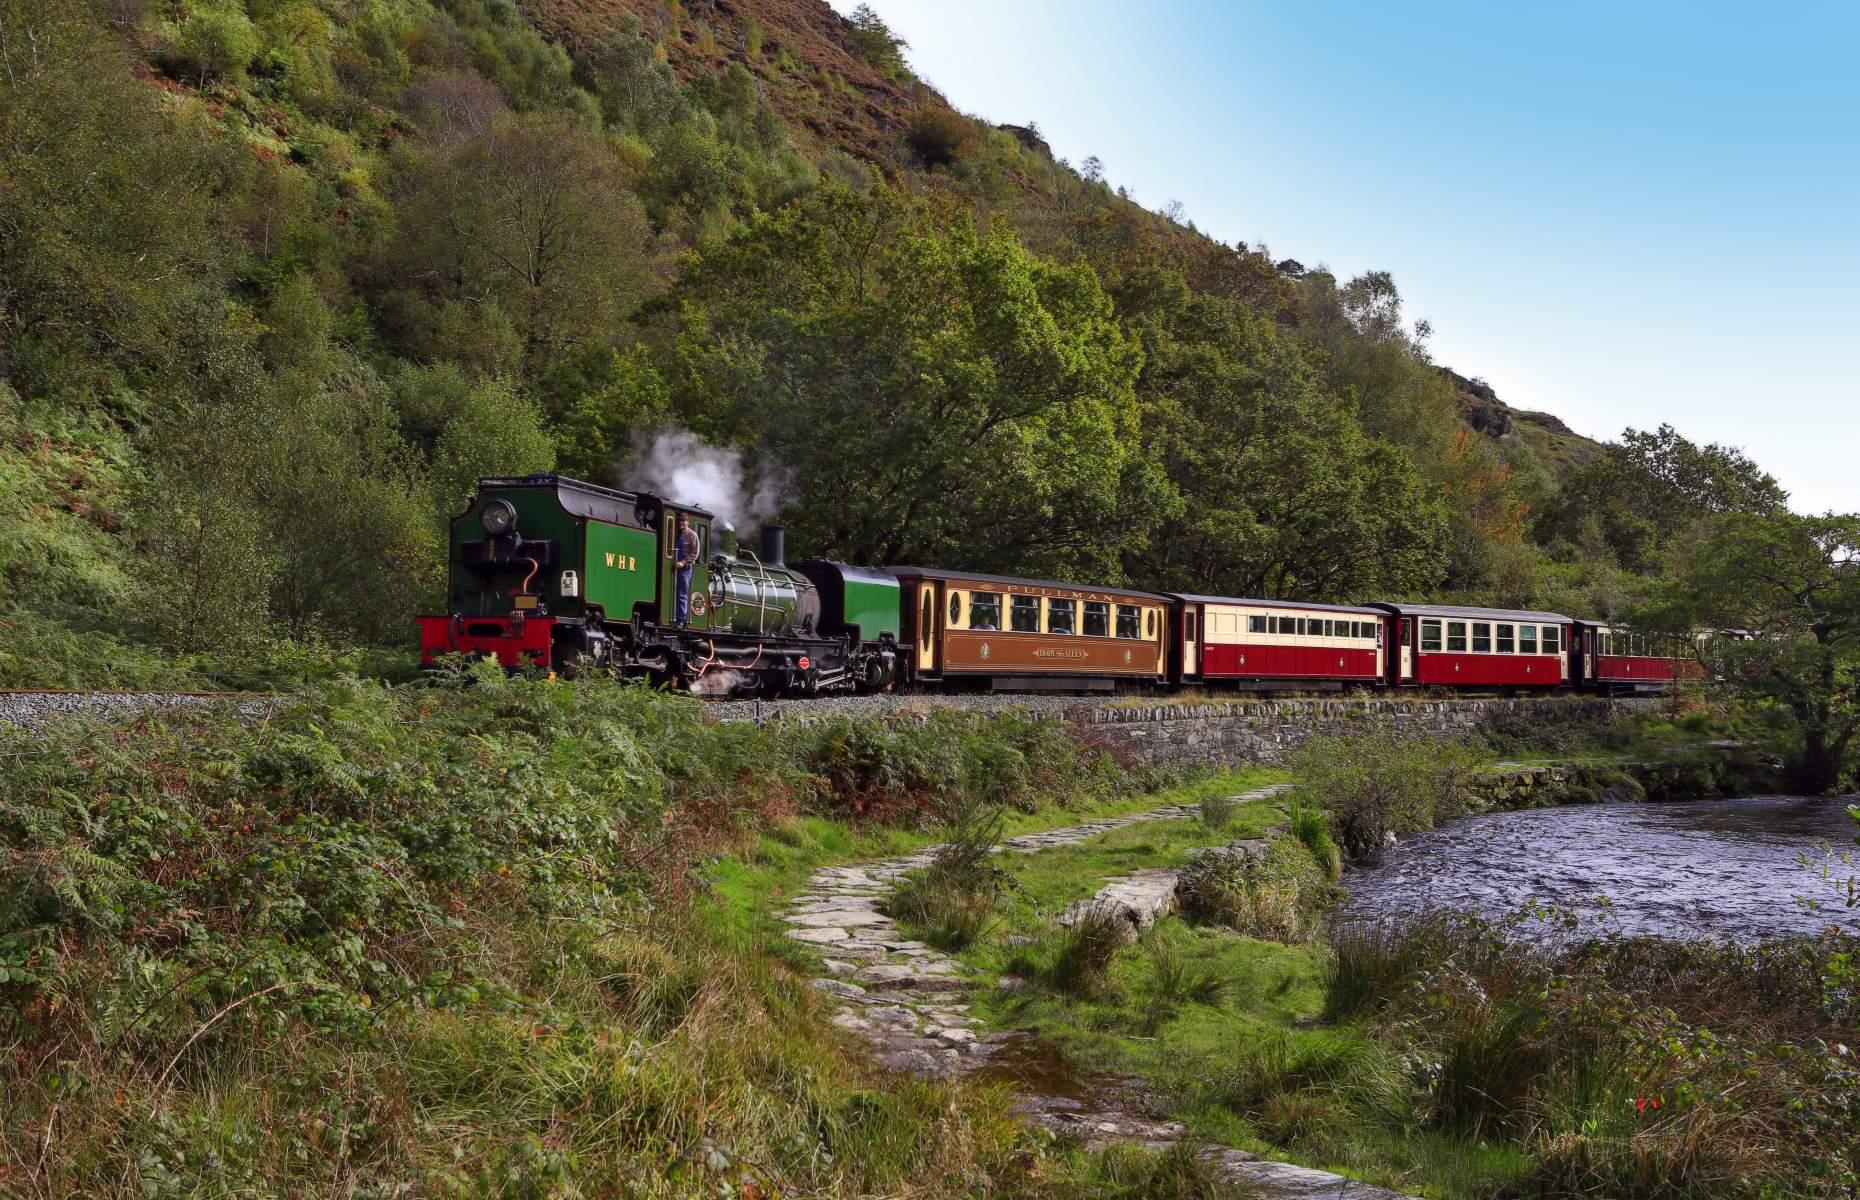 <p>Winding 25 miles (40km) across Snowdonia, the <a href="https://www.festrail.co.uk/">Welsh Highland Railway</a> is the longest heritage railway in the UK. Passing the foot of Snowdon from <a href="https://www.loveexploring.com/news/88159/things-to-see-and-do-in-caernarfon-castle-wales">Caernarfon</a>, the train cuts through the gorgeous Aberglaslyn Pass before arriving at Porthmadog on the Welsh coast where it shares a track gauge with the Ffestiniog Railway.</p>  <p><a href="https://www.loveexploring.com/gallerylist/64254/30-reasons-to-love-wales"><strong>Discover 30 reasons to love Wales</strong></a></p>